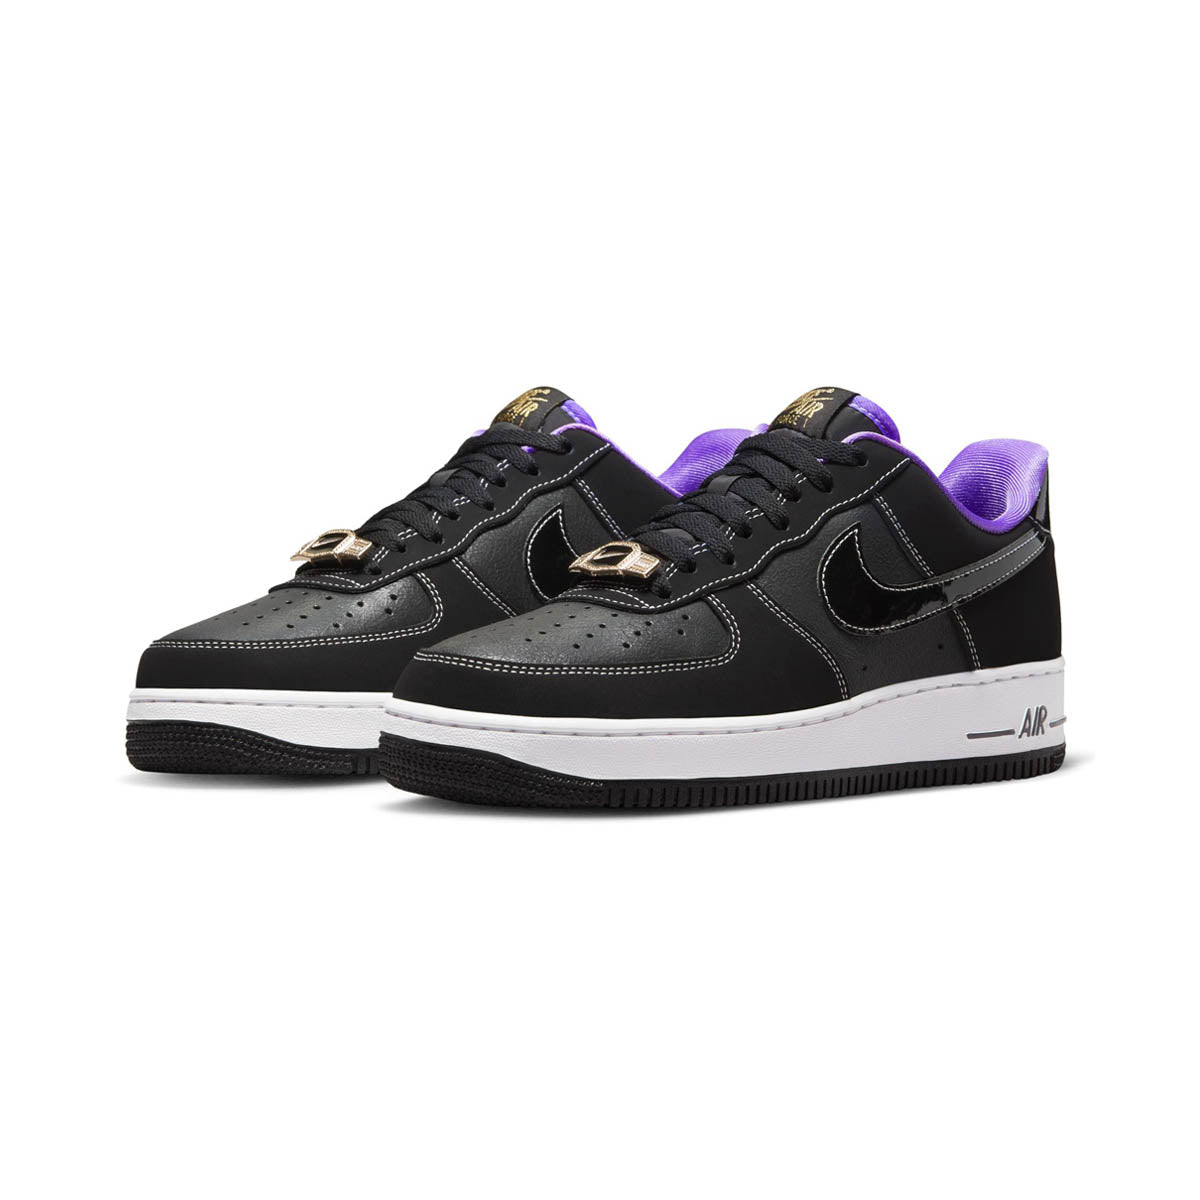 Nike Air Force 1 '07 LV8 1 Men's Shoes.